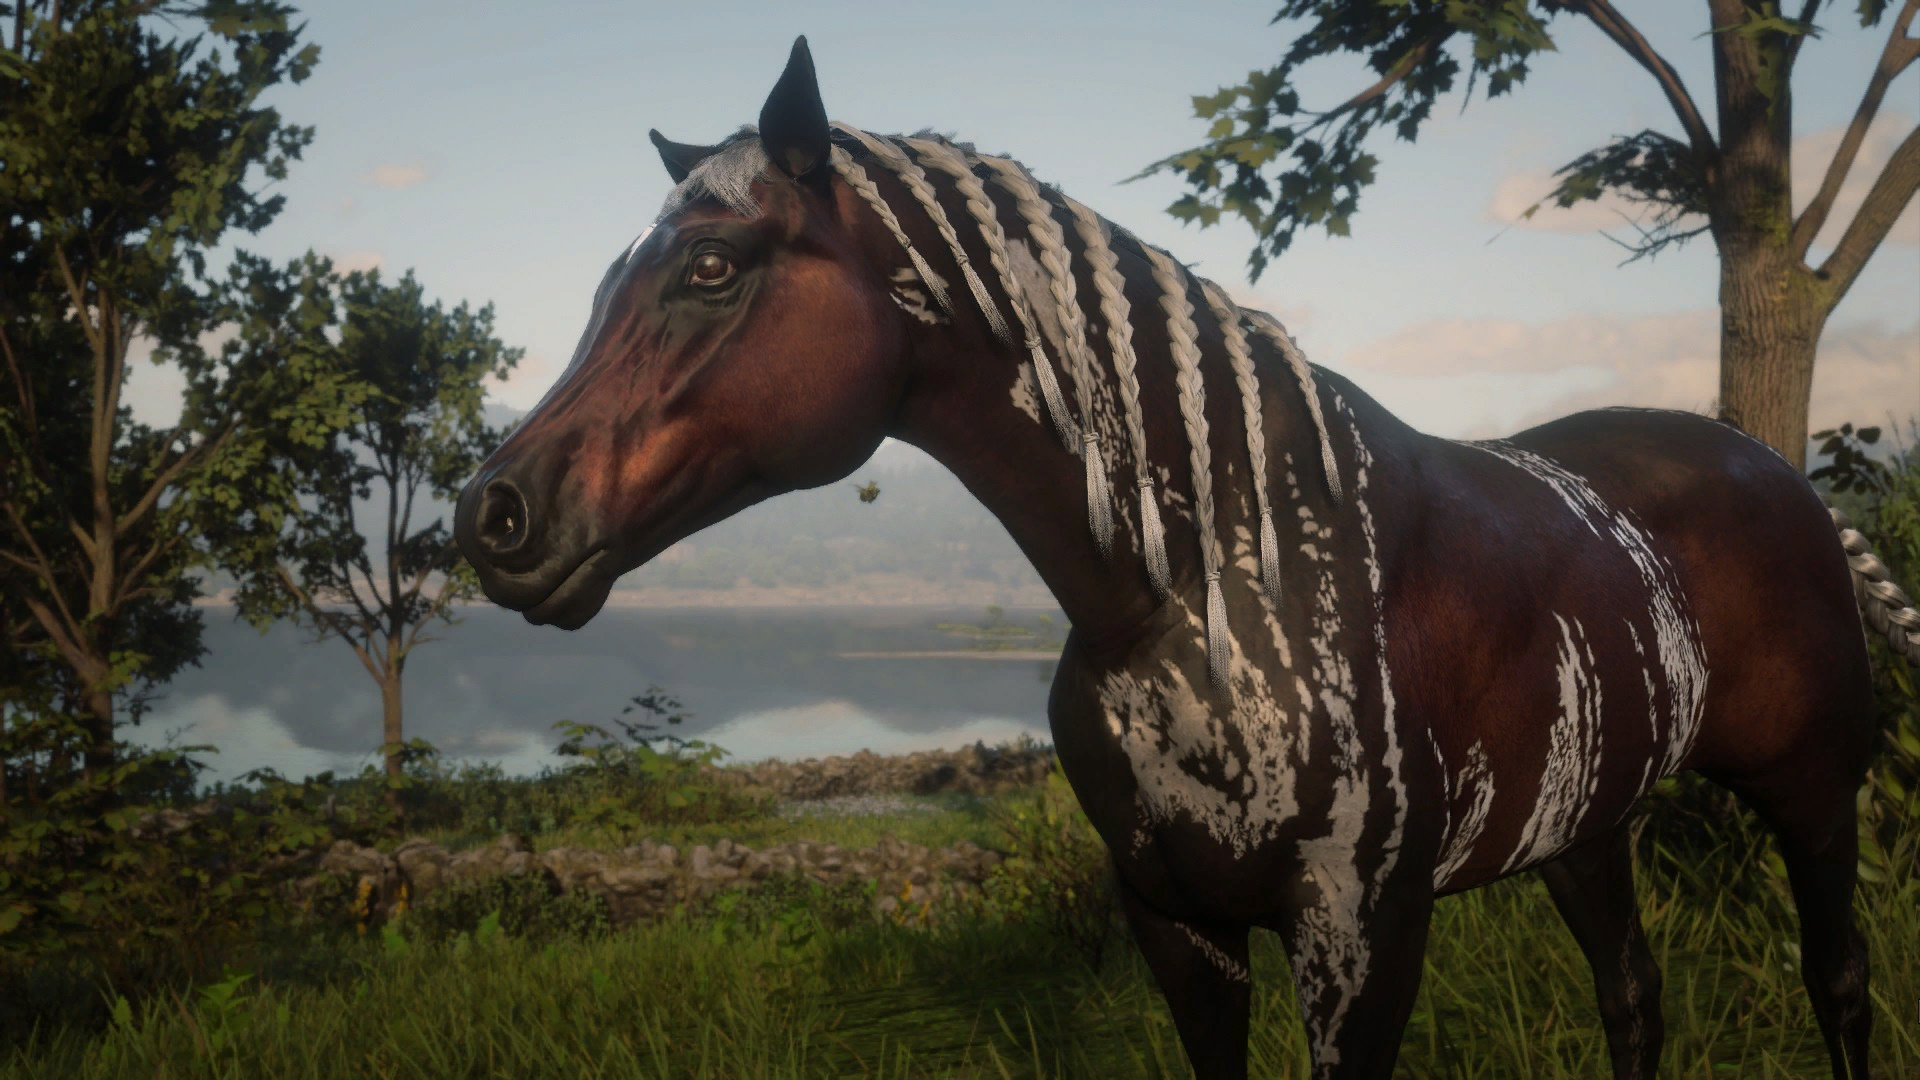 TotalCretin on Twitter: "My brindle Arabian from Red Redemption 2, who I've named Missi #reddeadredemption #rdr2 https://t.co/CuLZQplqI2" Twitter